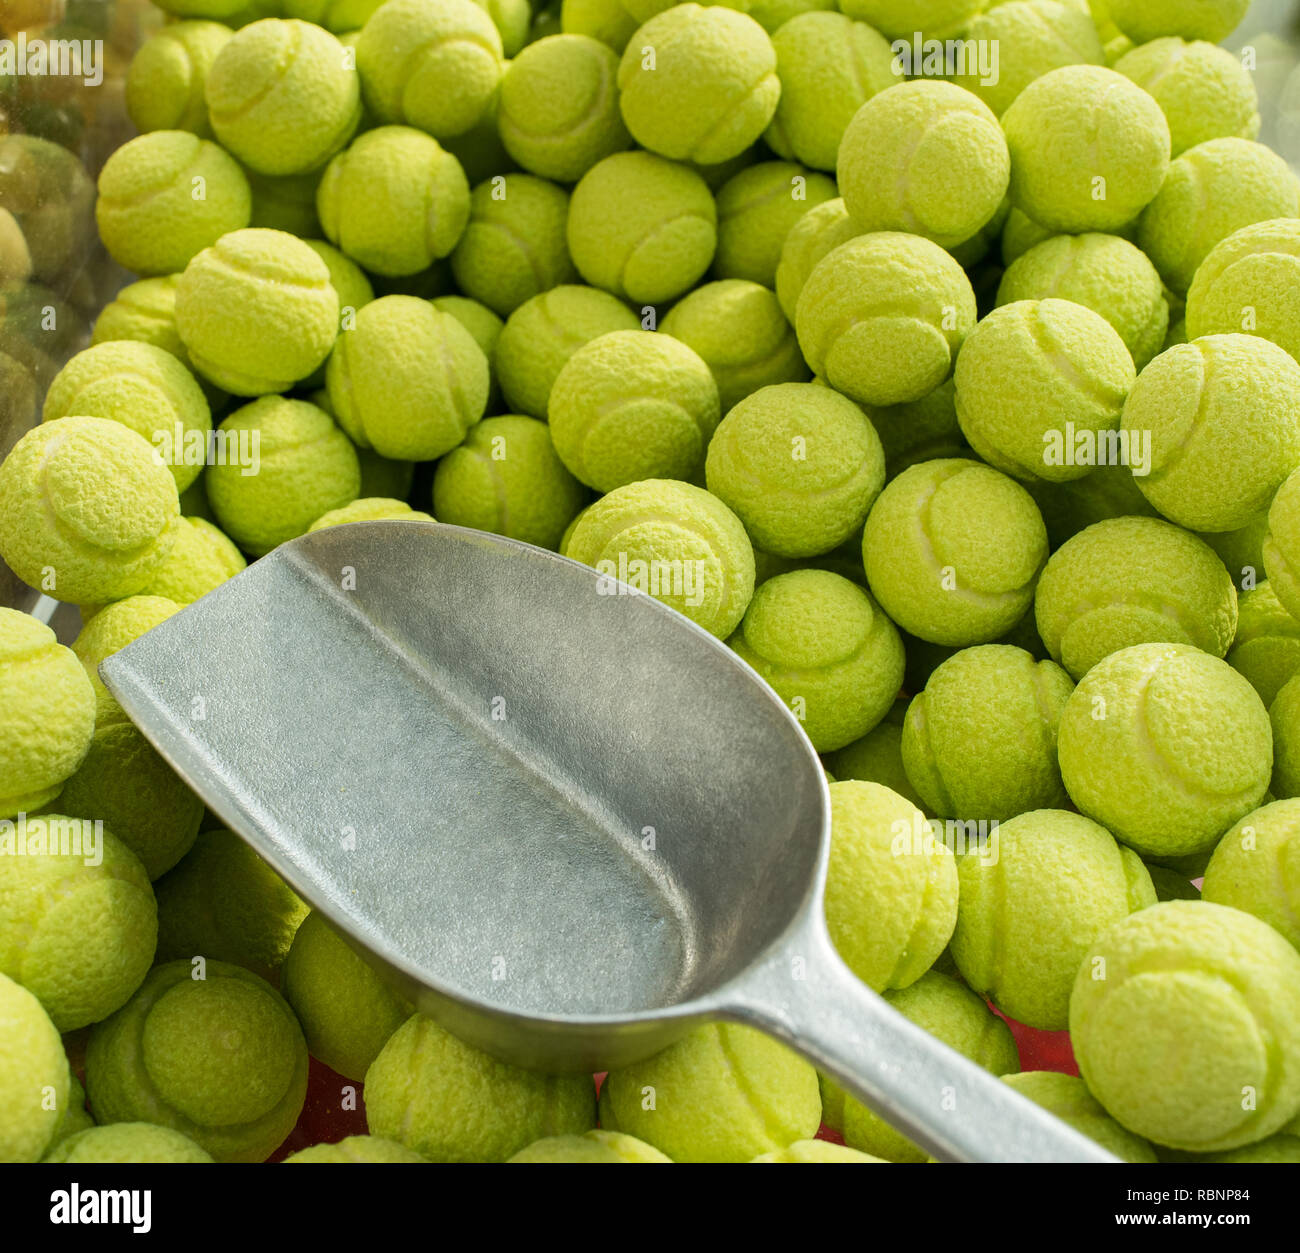 background of green sweets like tennis balls with spoon Stock Photo